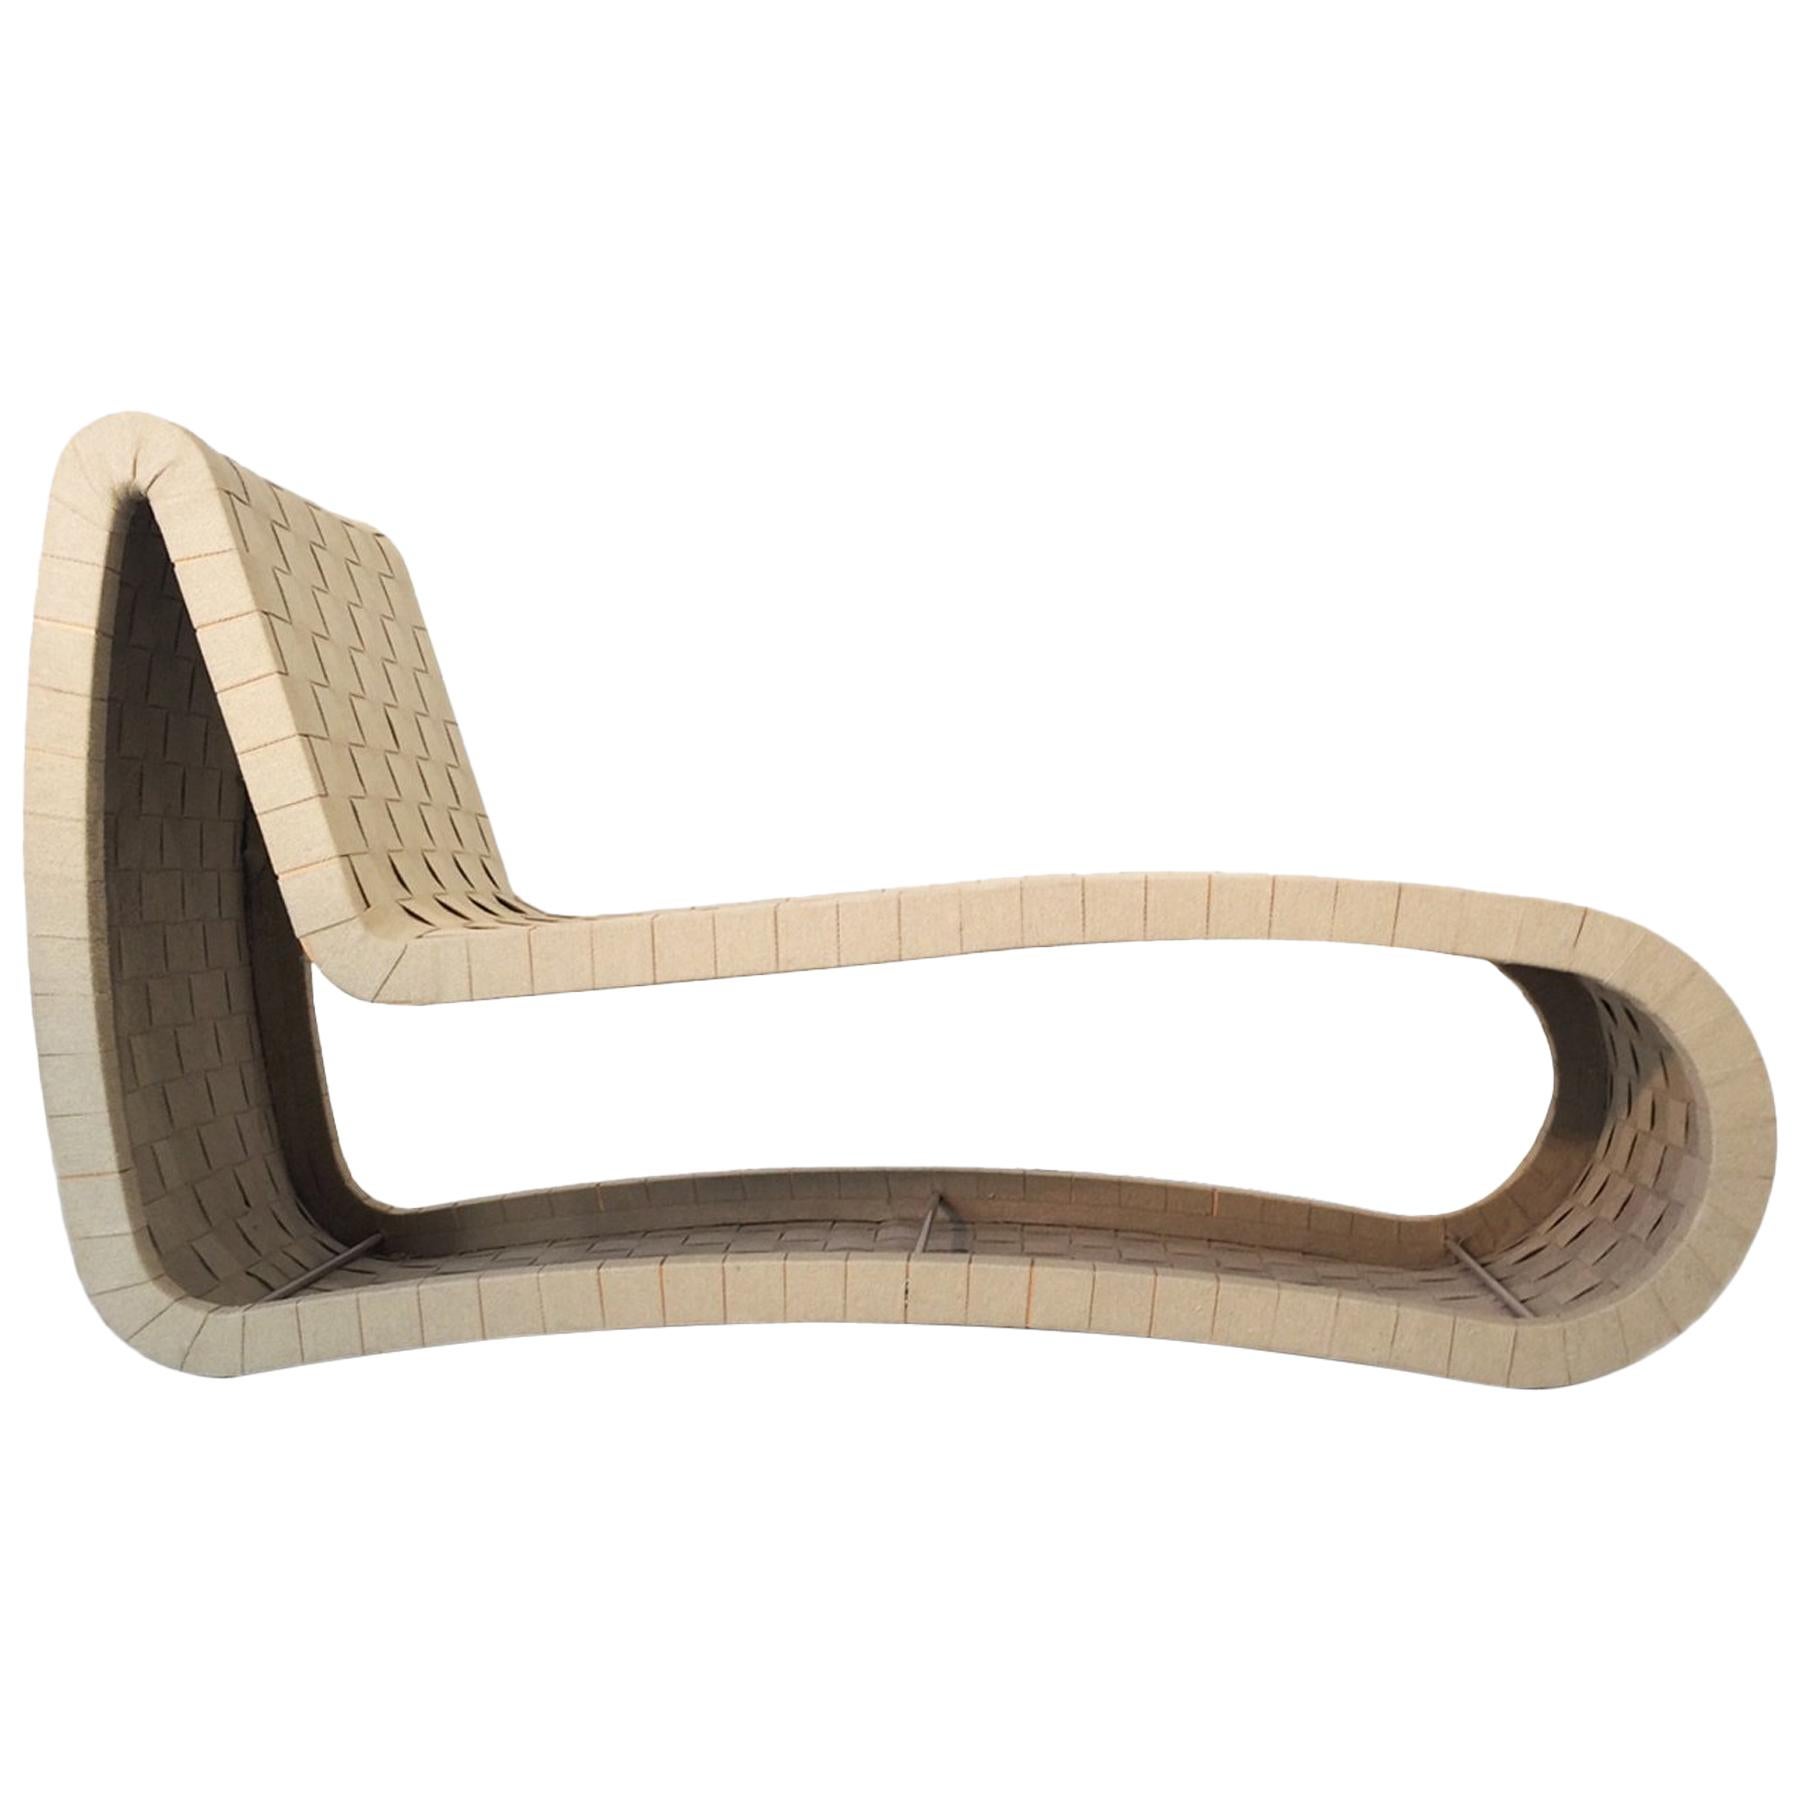 Bentwood and Webbing Midcentury Scandinavian Chaise Longue